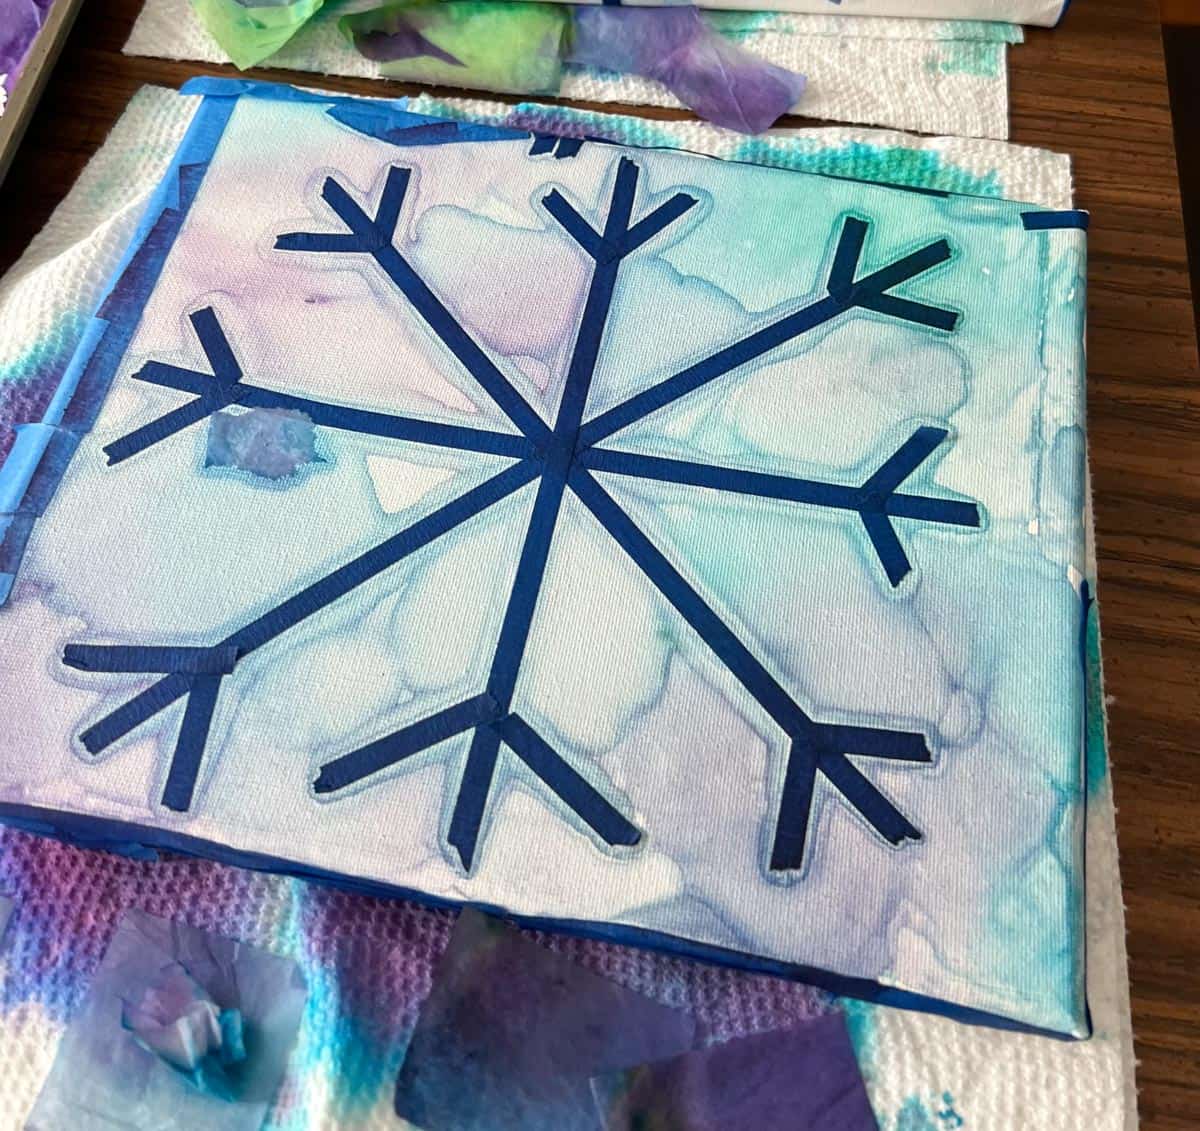 watercolor looking painted in background of a snowflake.